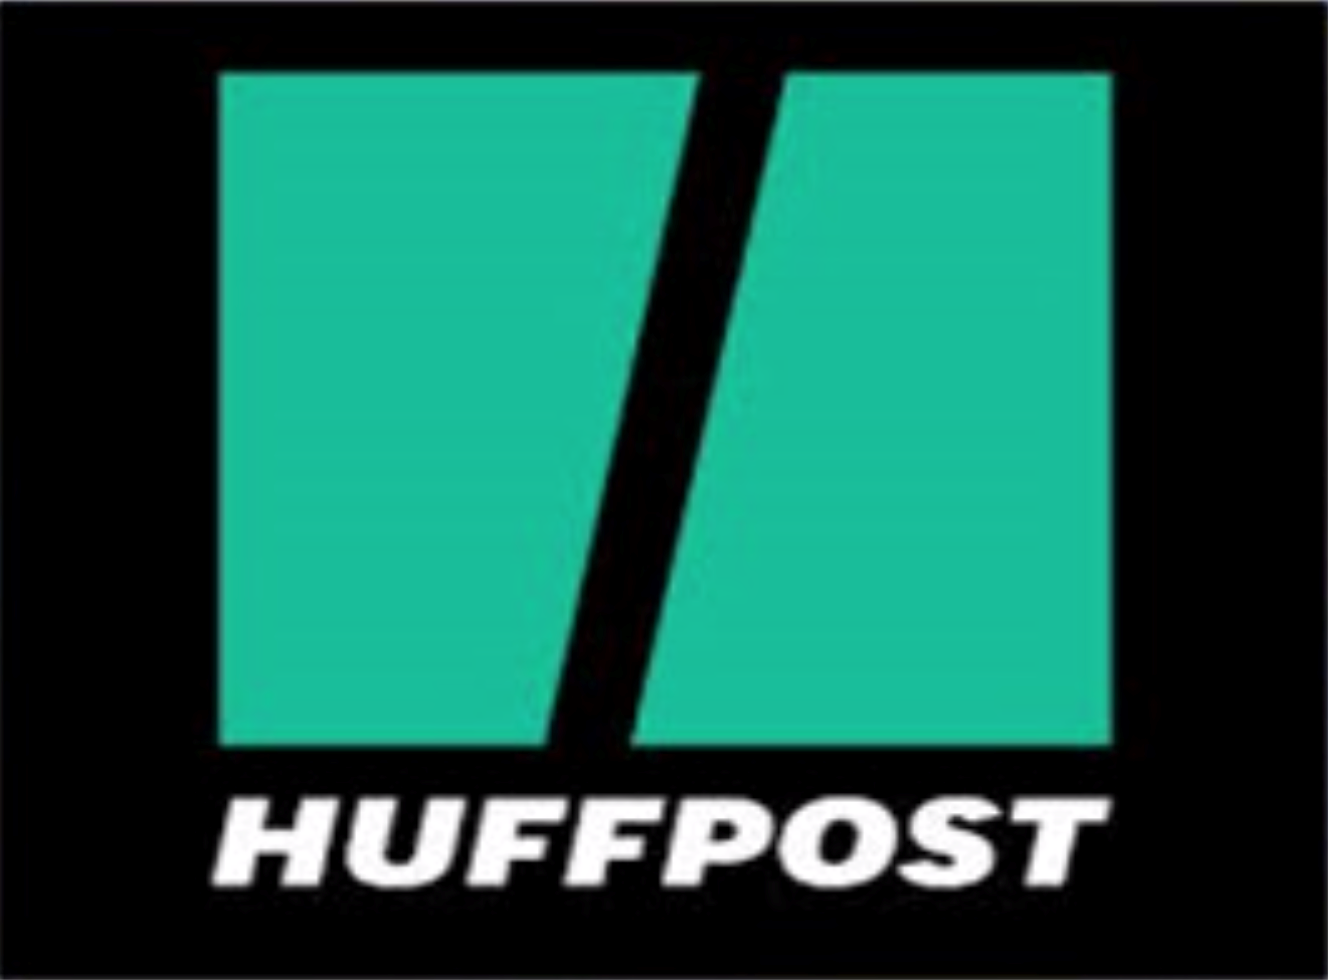 HuffPost logo in black and green